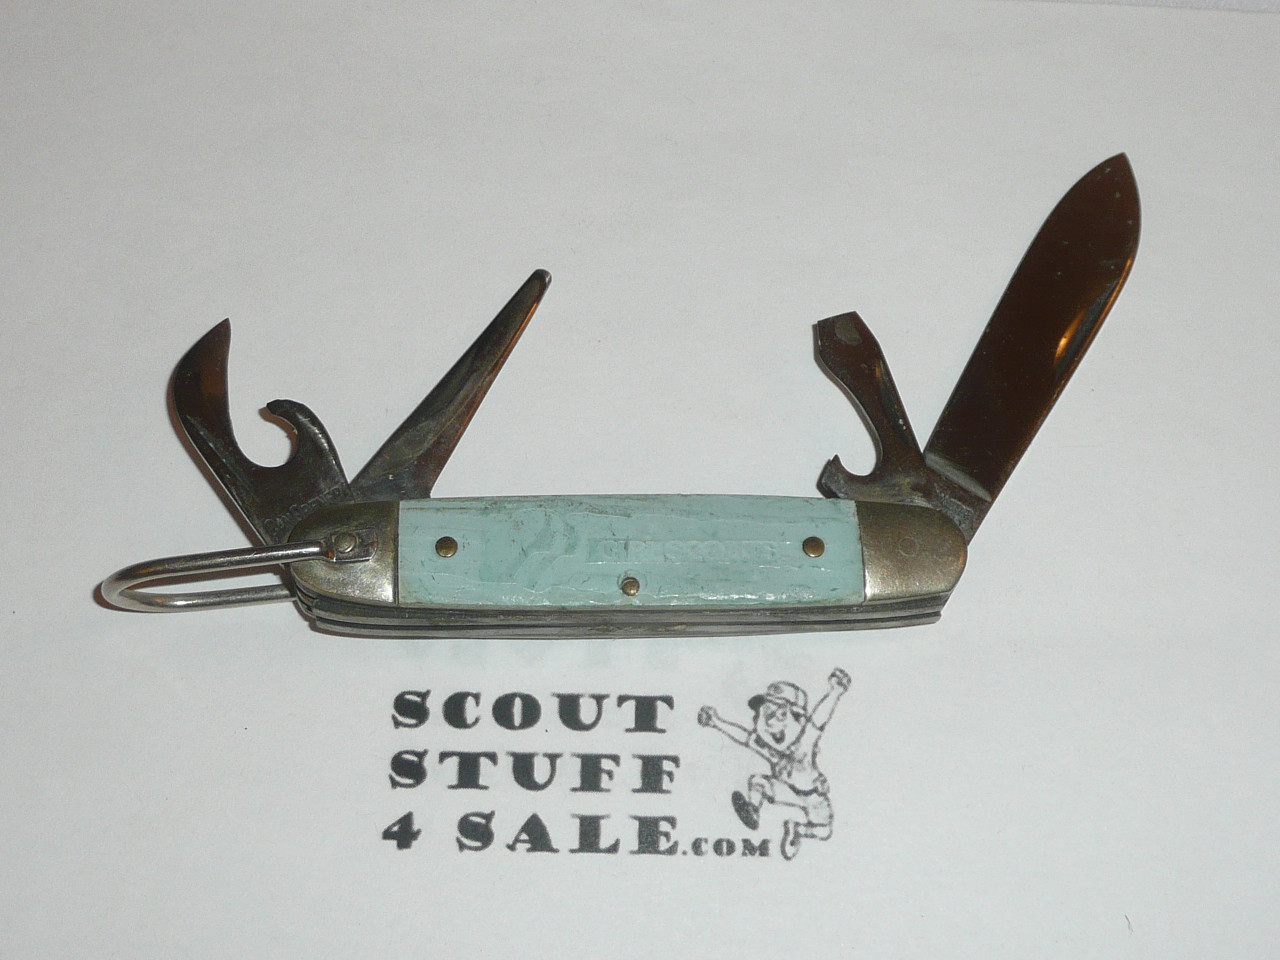 Girl Scout Knife, Kutmaster Manufacturer, textured body, Like new